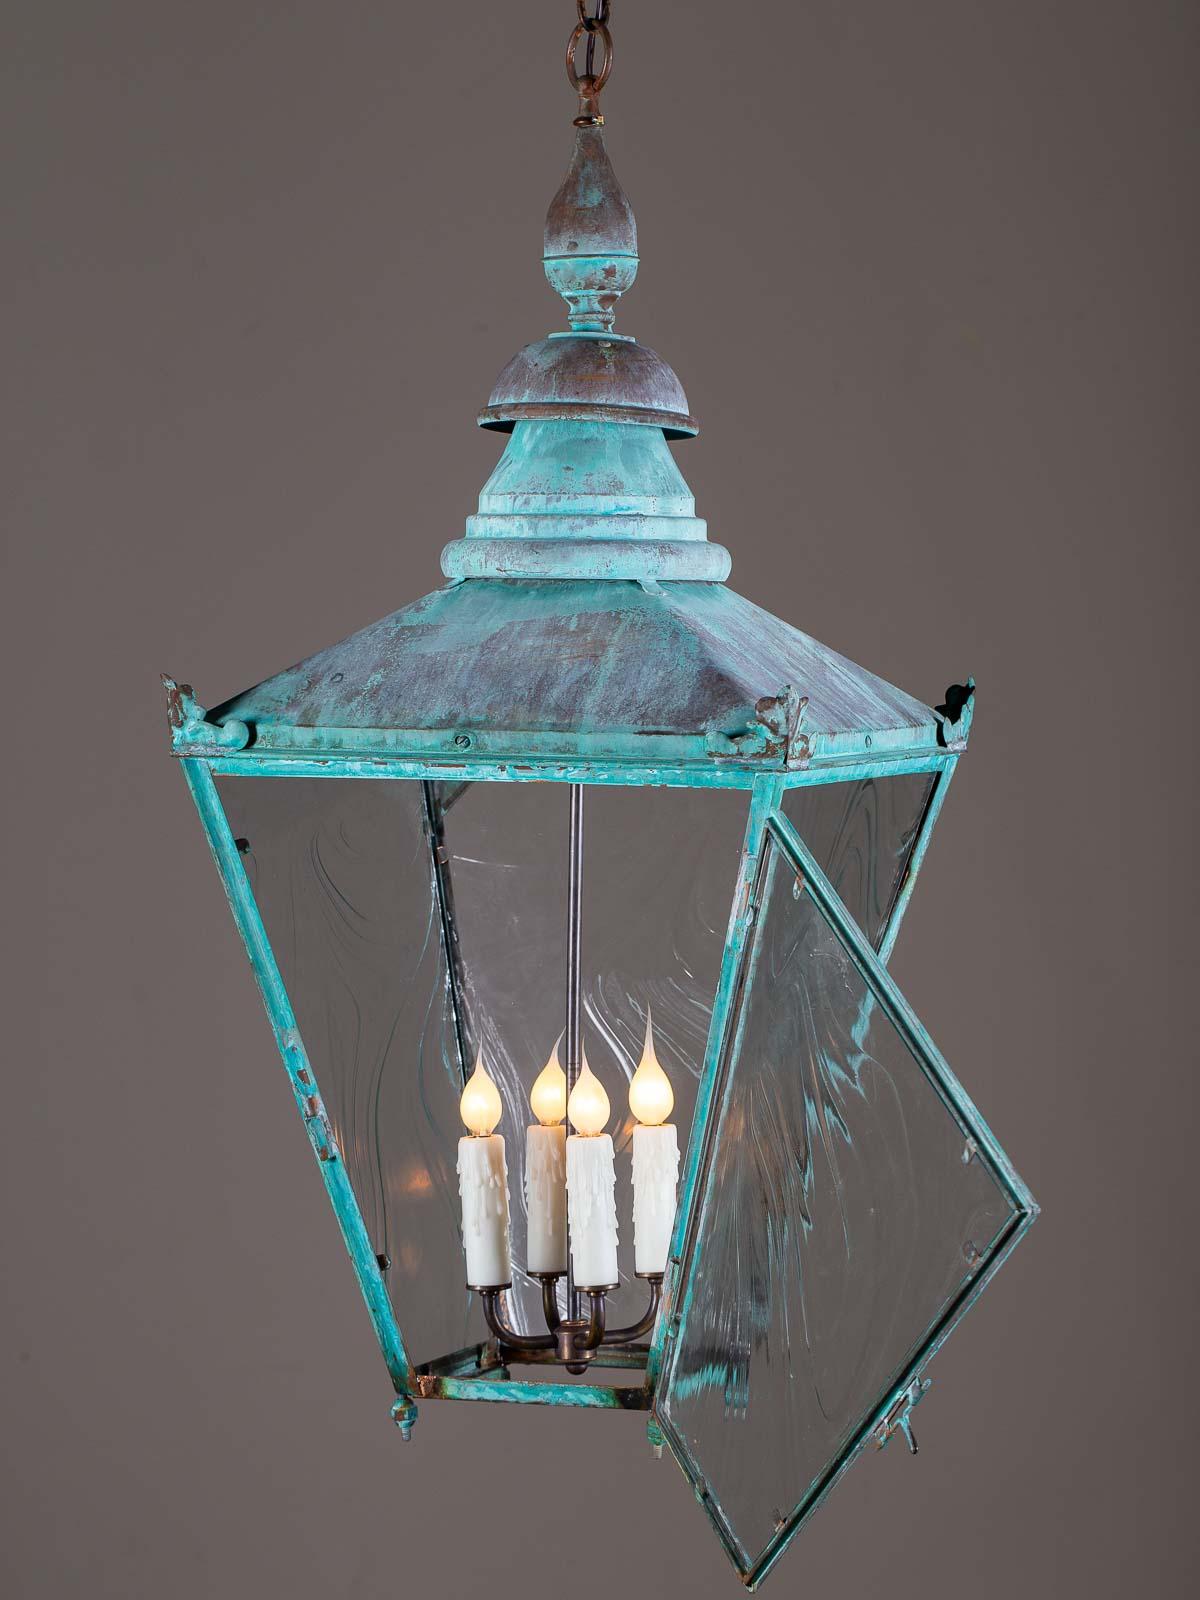 This handsome antique English copper Verdigris lantern circa 1890 has been rewired for American electricity and fitted with a four light interior fixture. The square shape of the lantern with its tapered sides and conical top reflects an age when